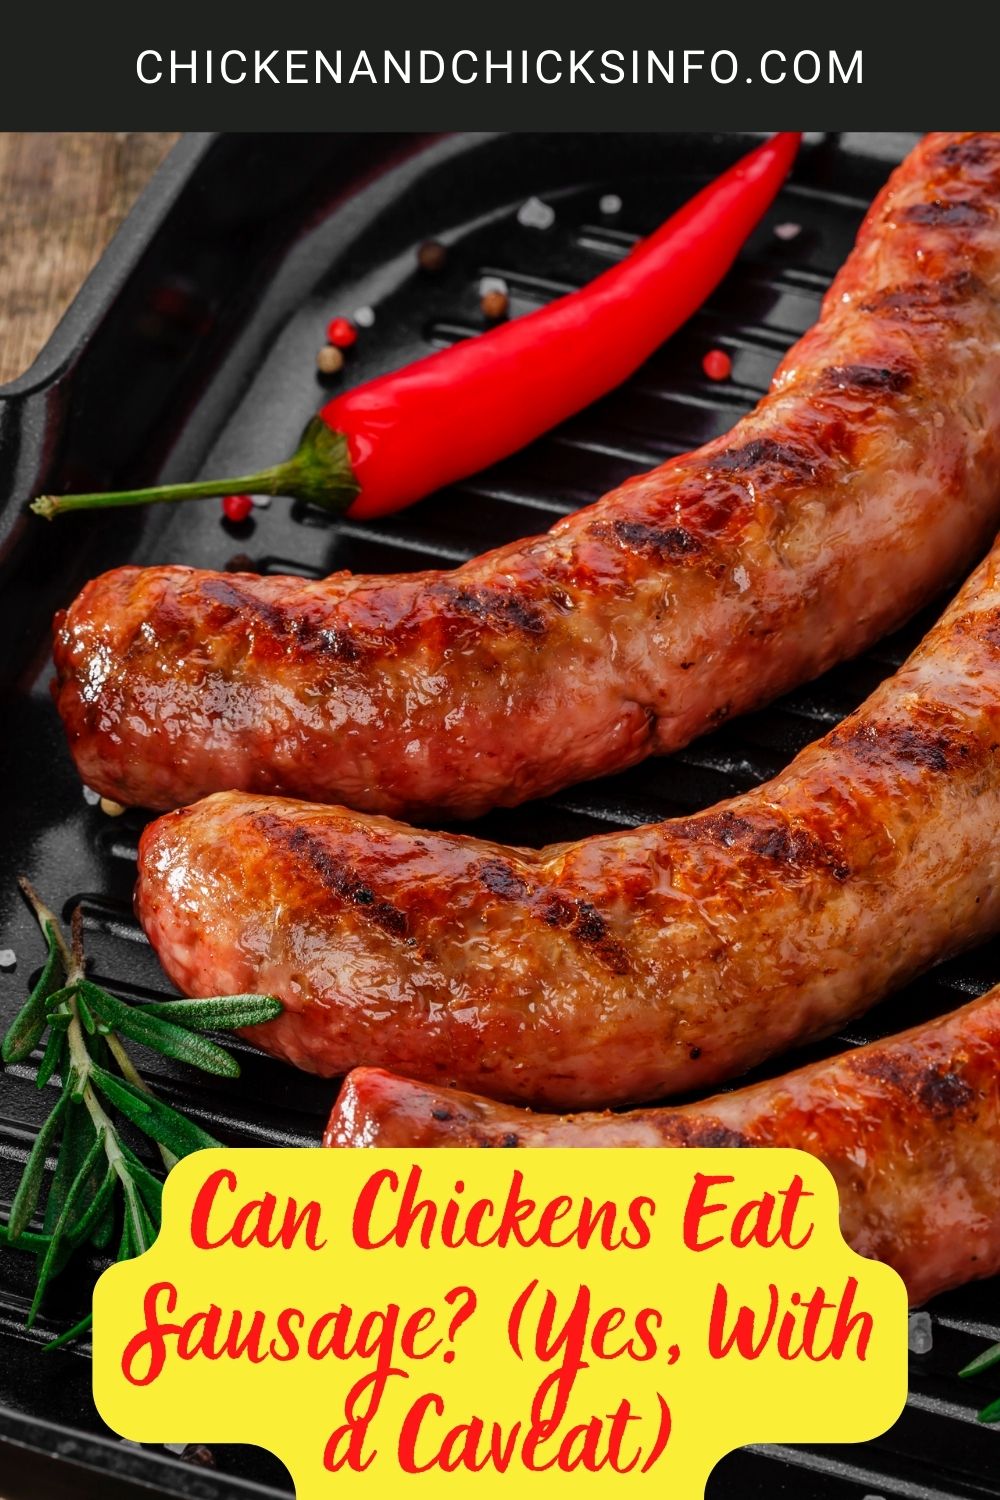 Can Chickens Eat Sausage? (Yes, With a Caveat) poster.
